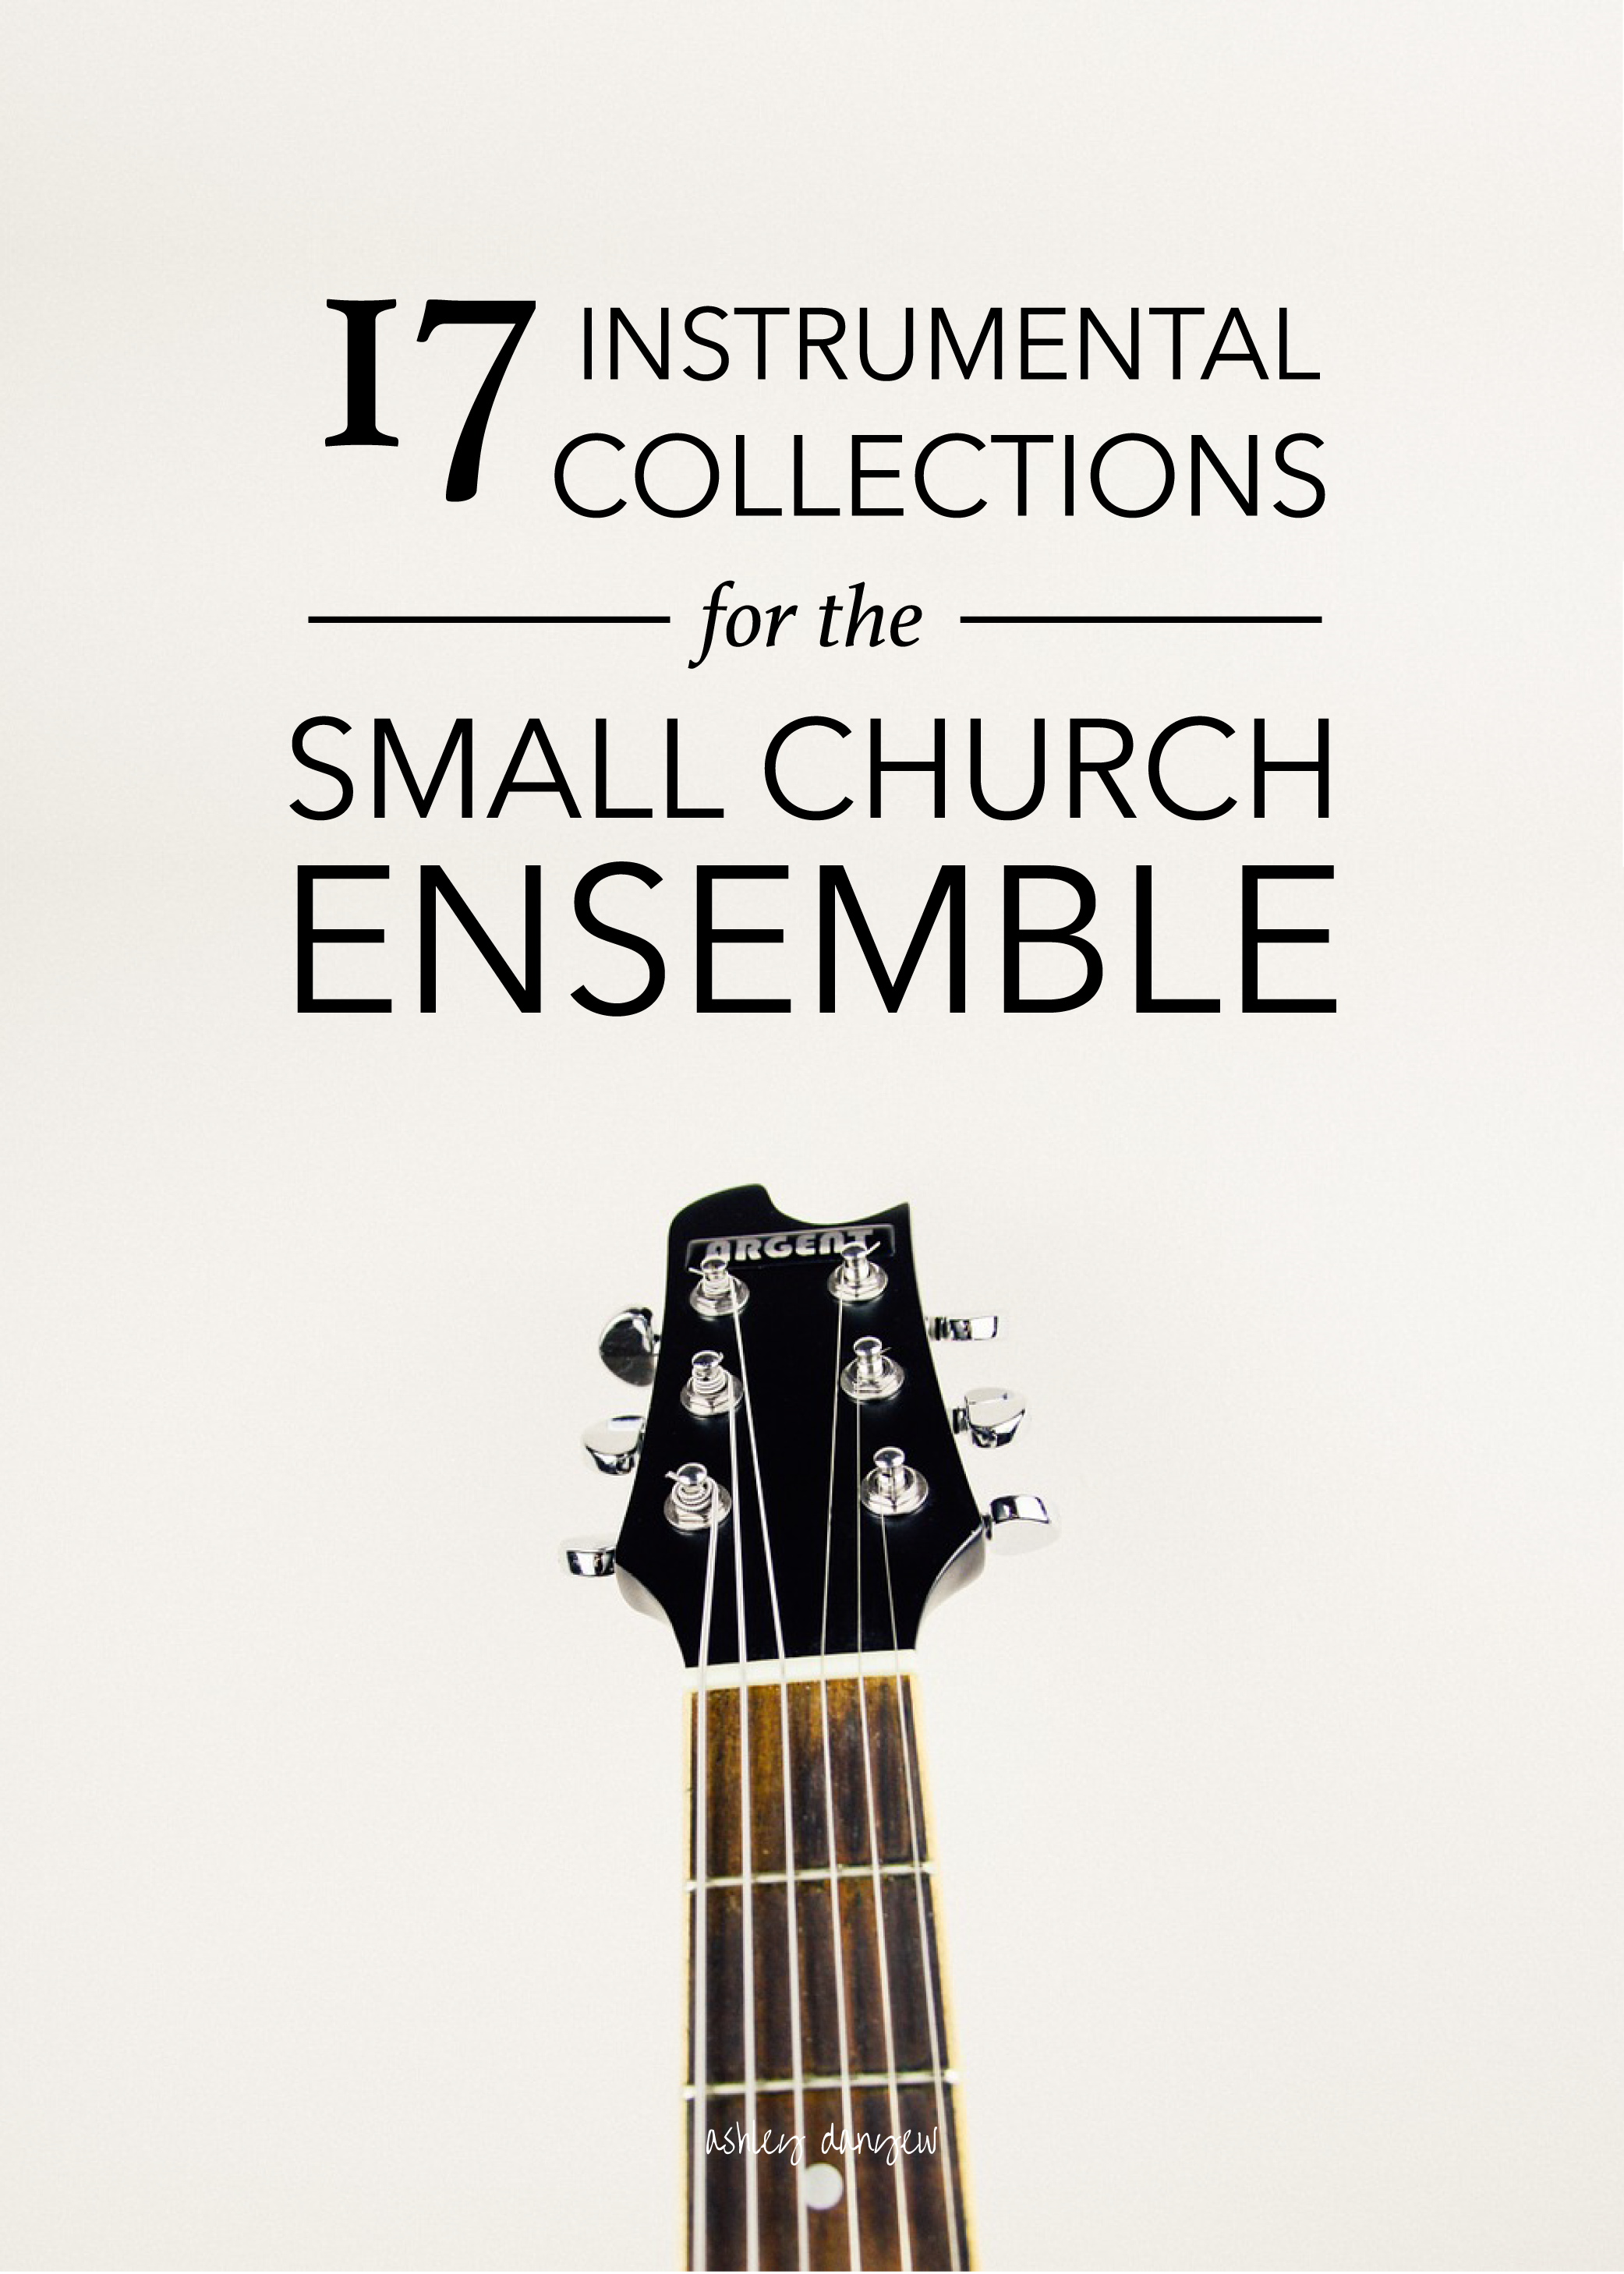 Copy of 17 Instrumental Collections for the Small Church Ensemble